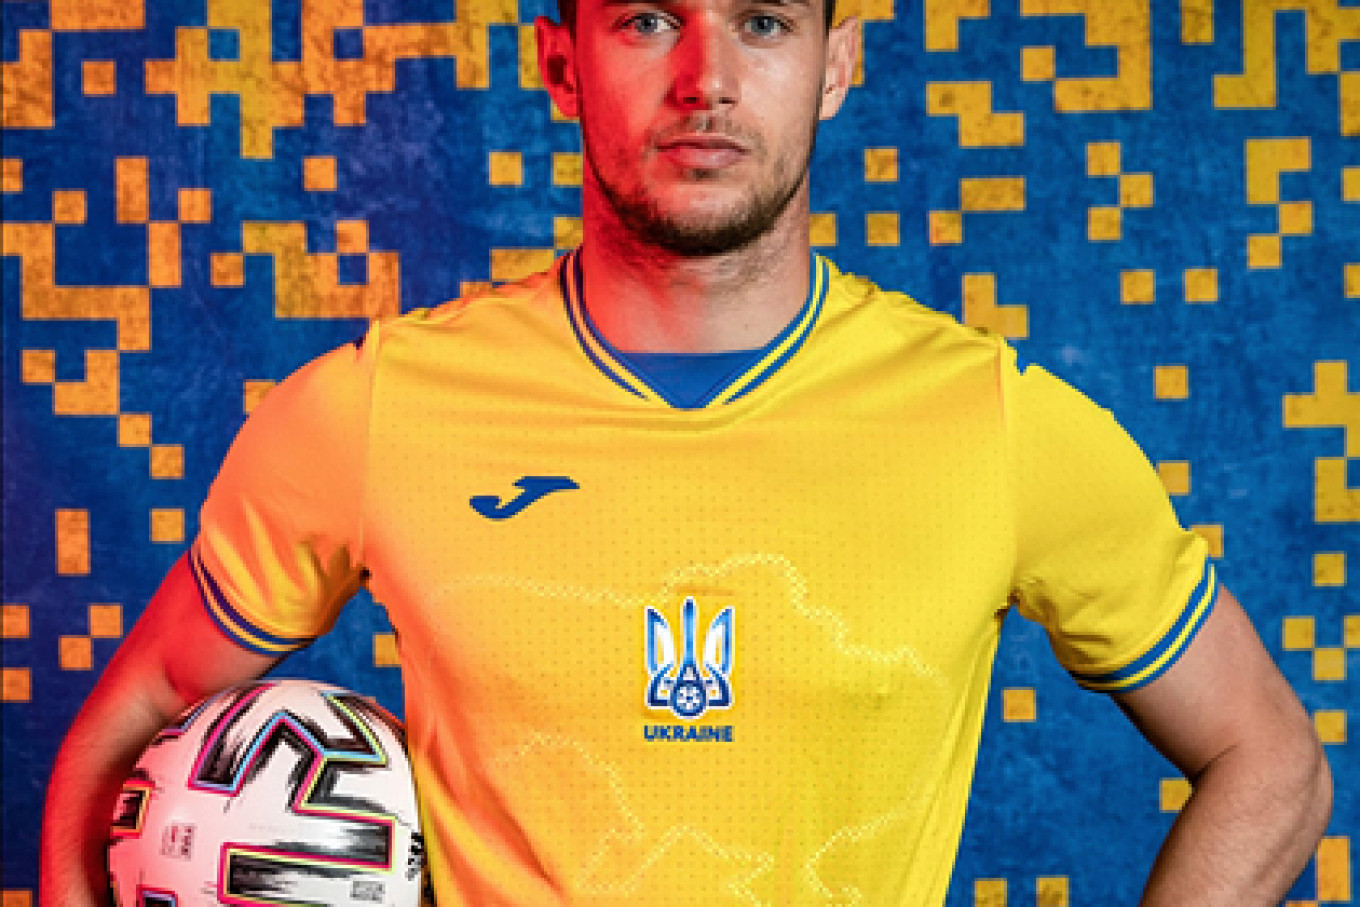 Russia Protests As Ukraine Unveils Euro 2020 Uniform The Moscow Times